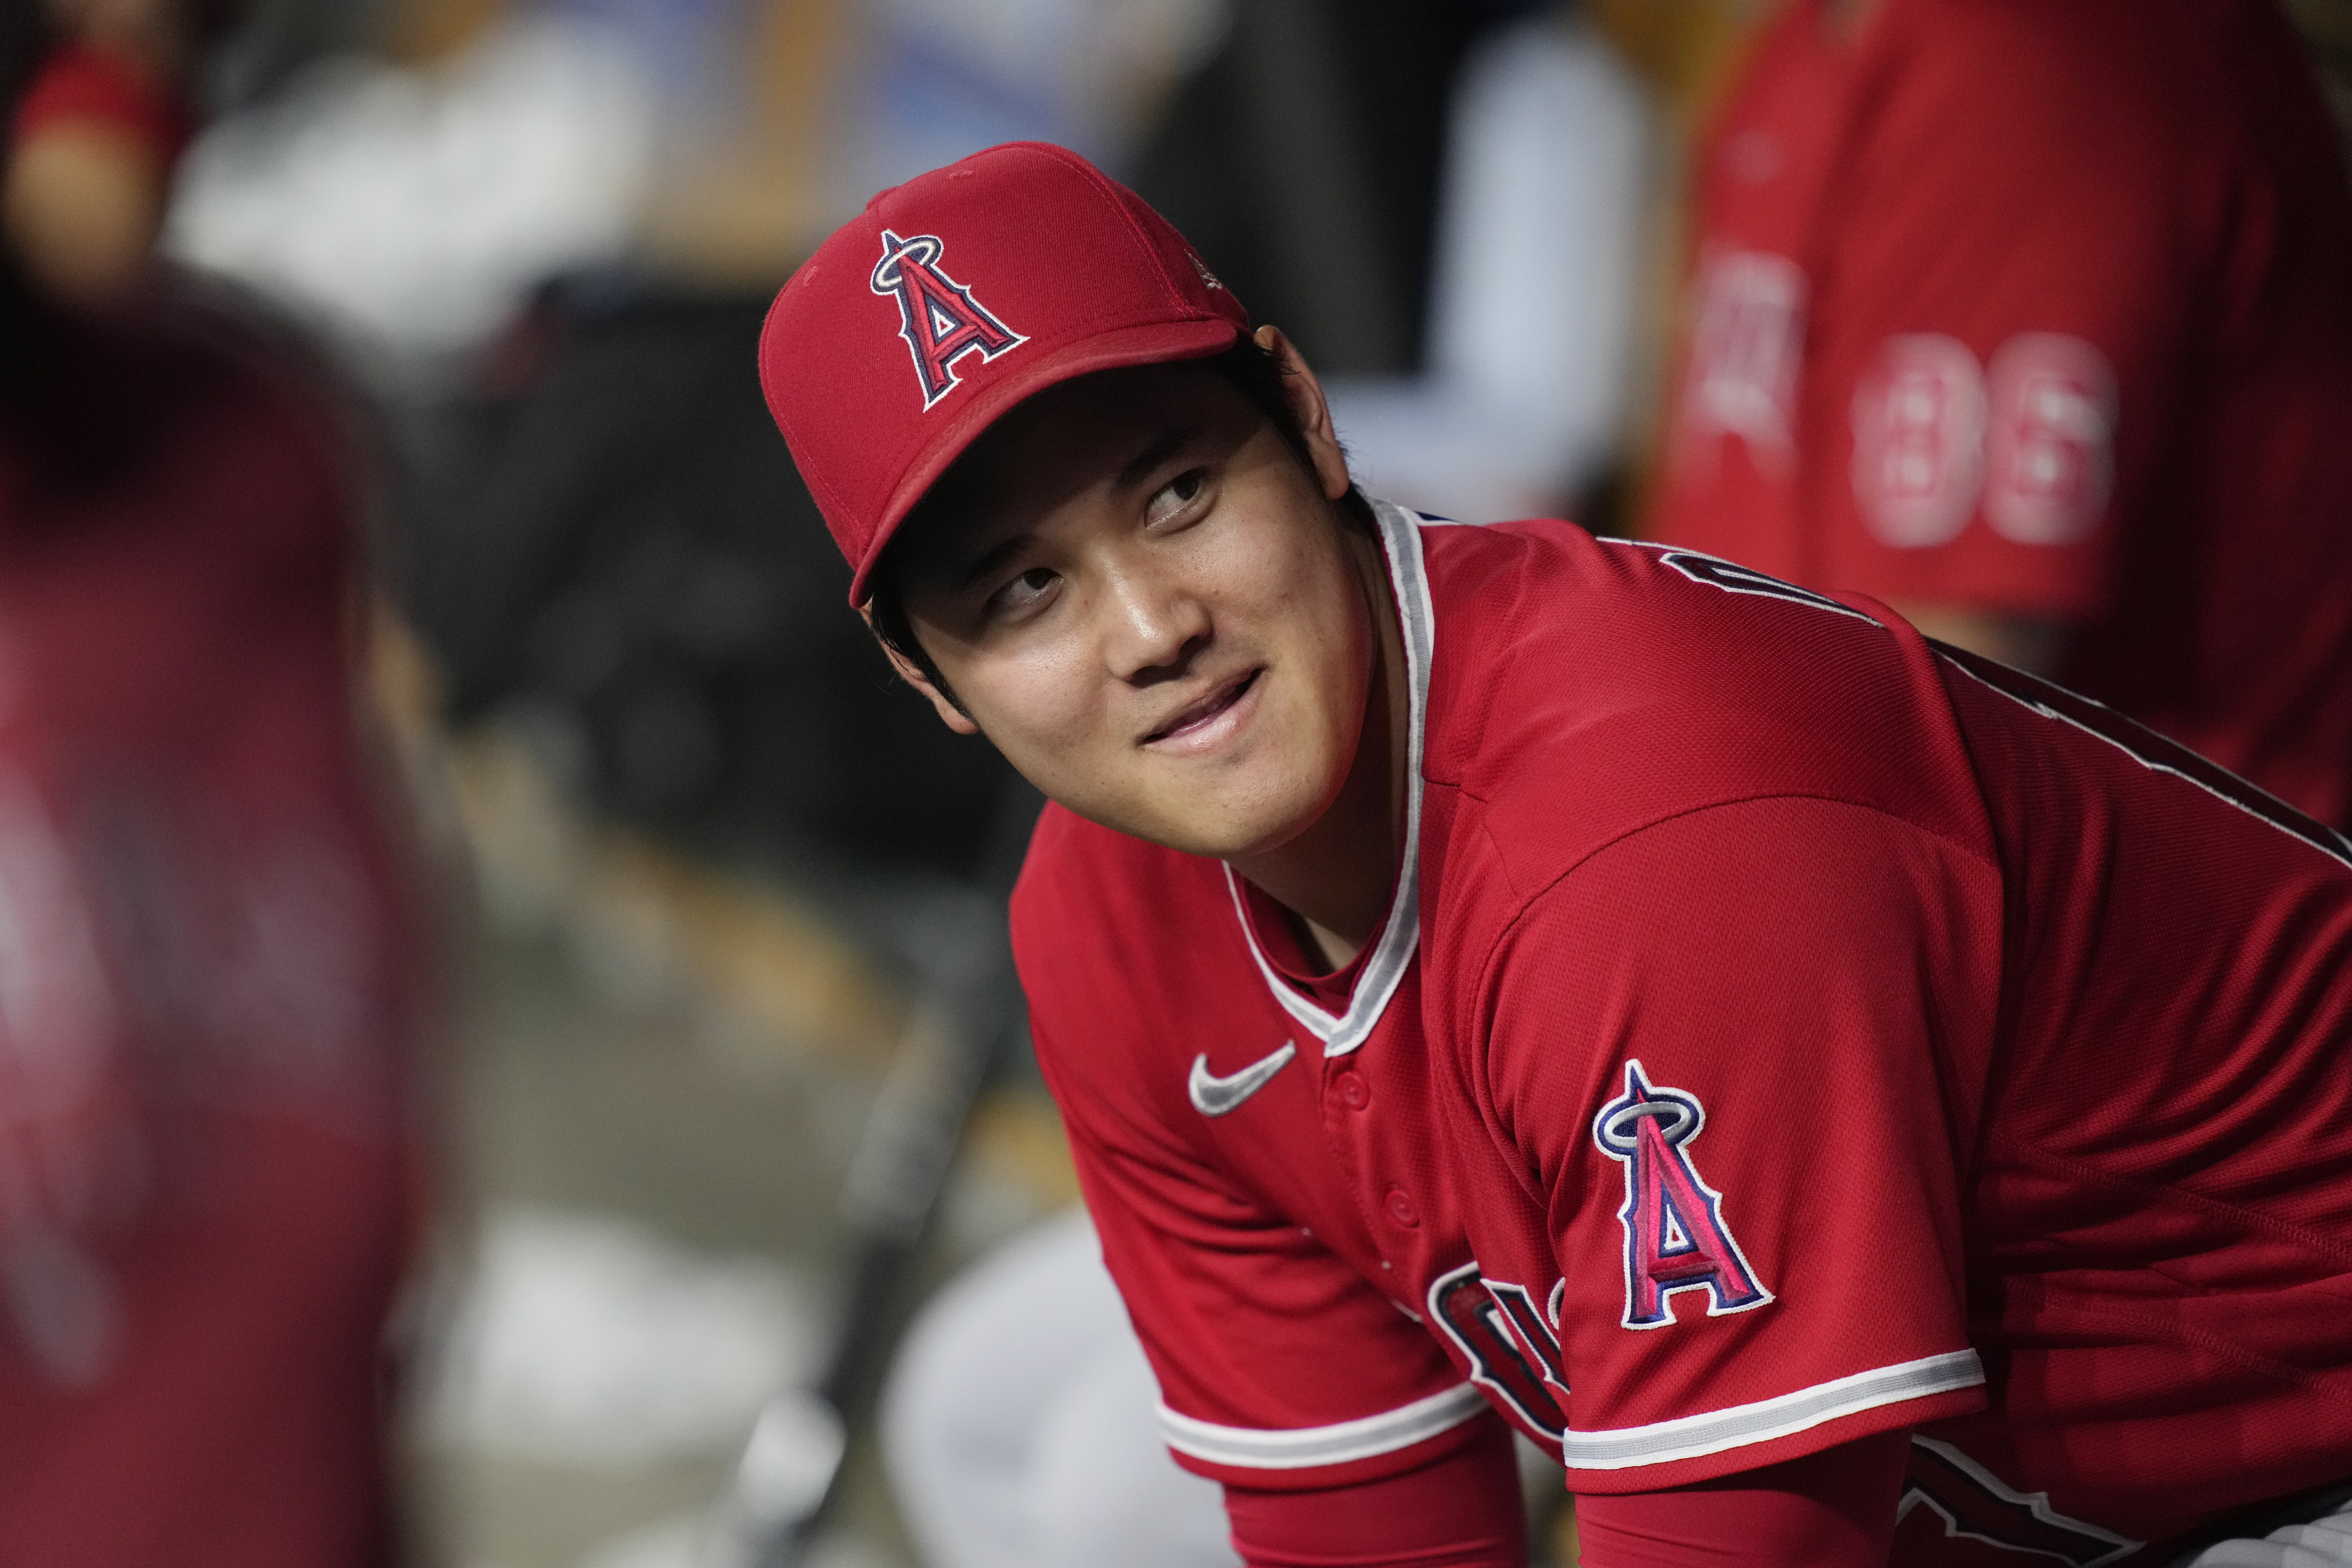 Shohei Ohtani is staying with the Angels, at least for the rest of